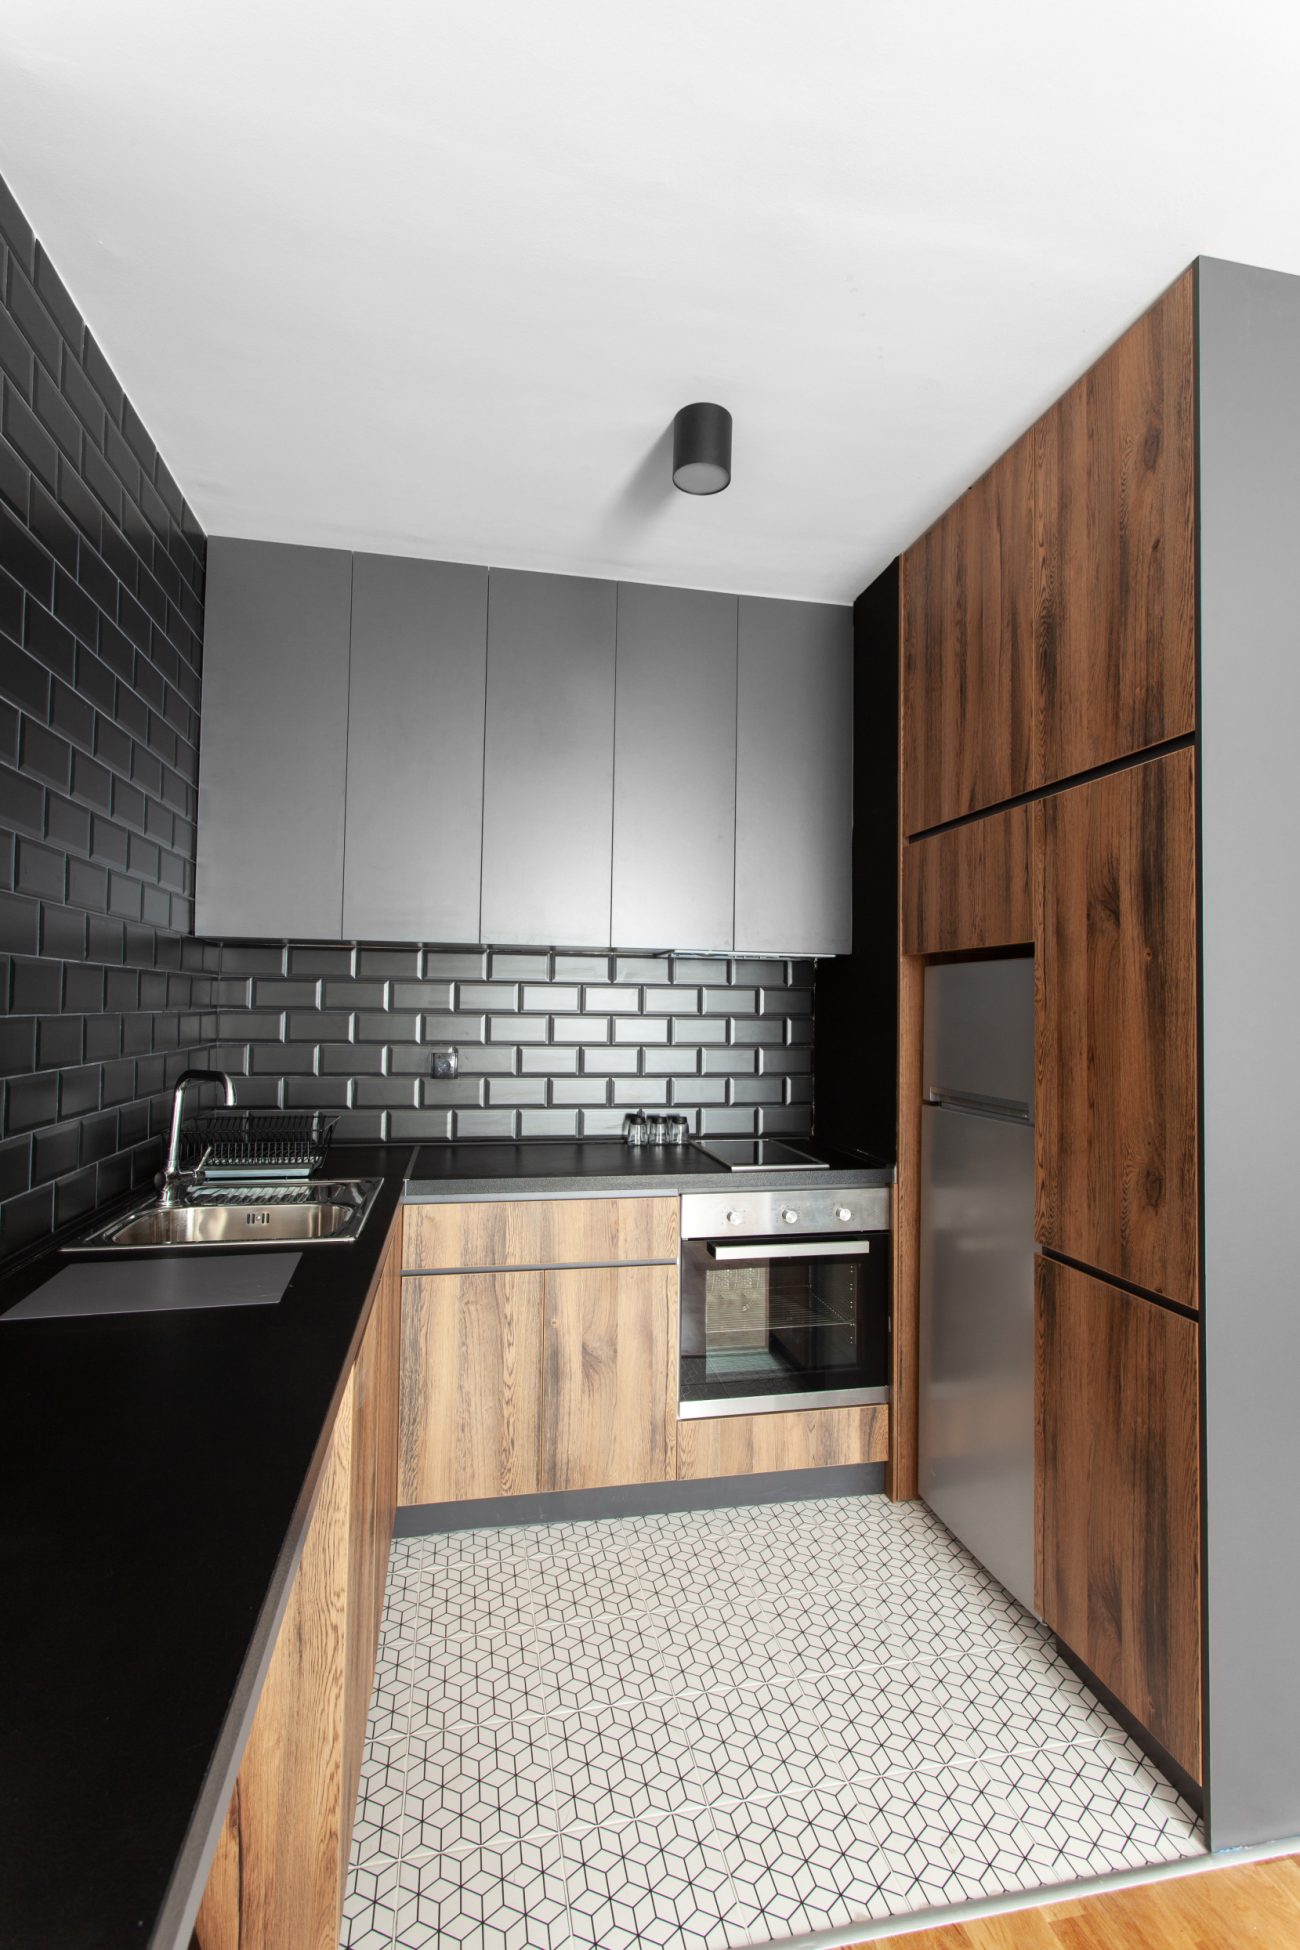 Small, functional kitchen with shelving and overhead cabinets, plus ample space for food preparation